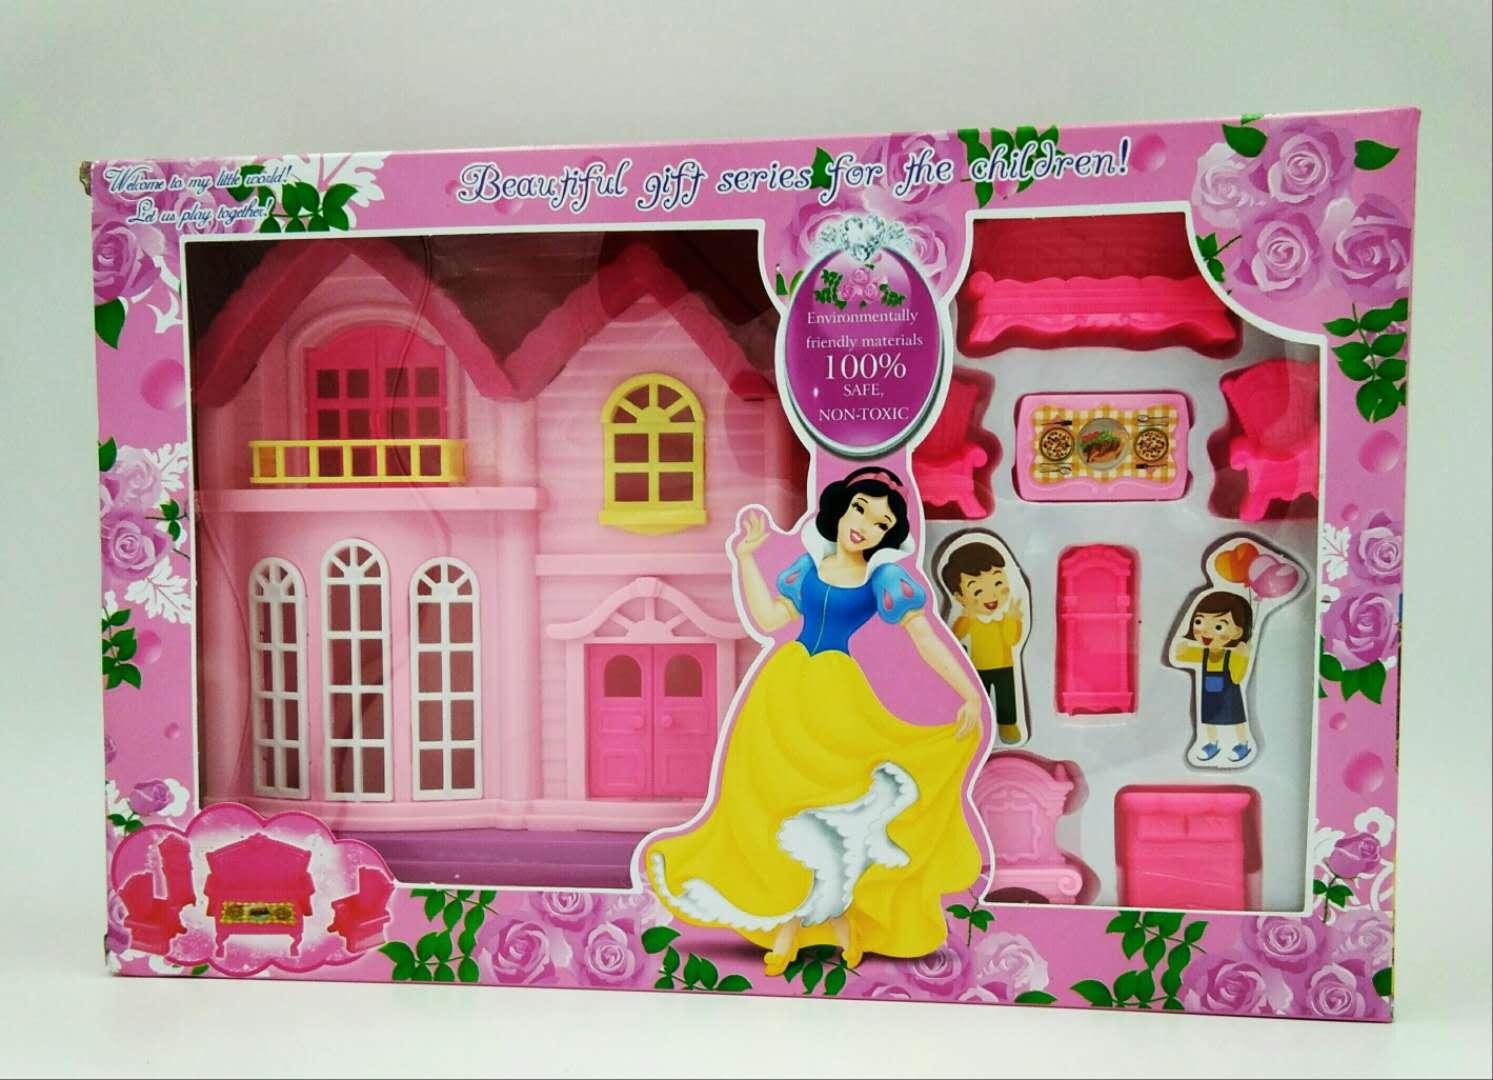 doll house online